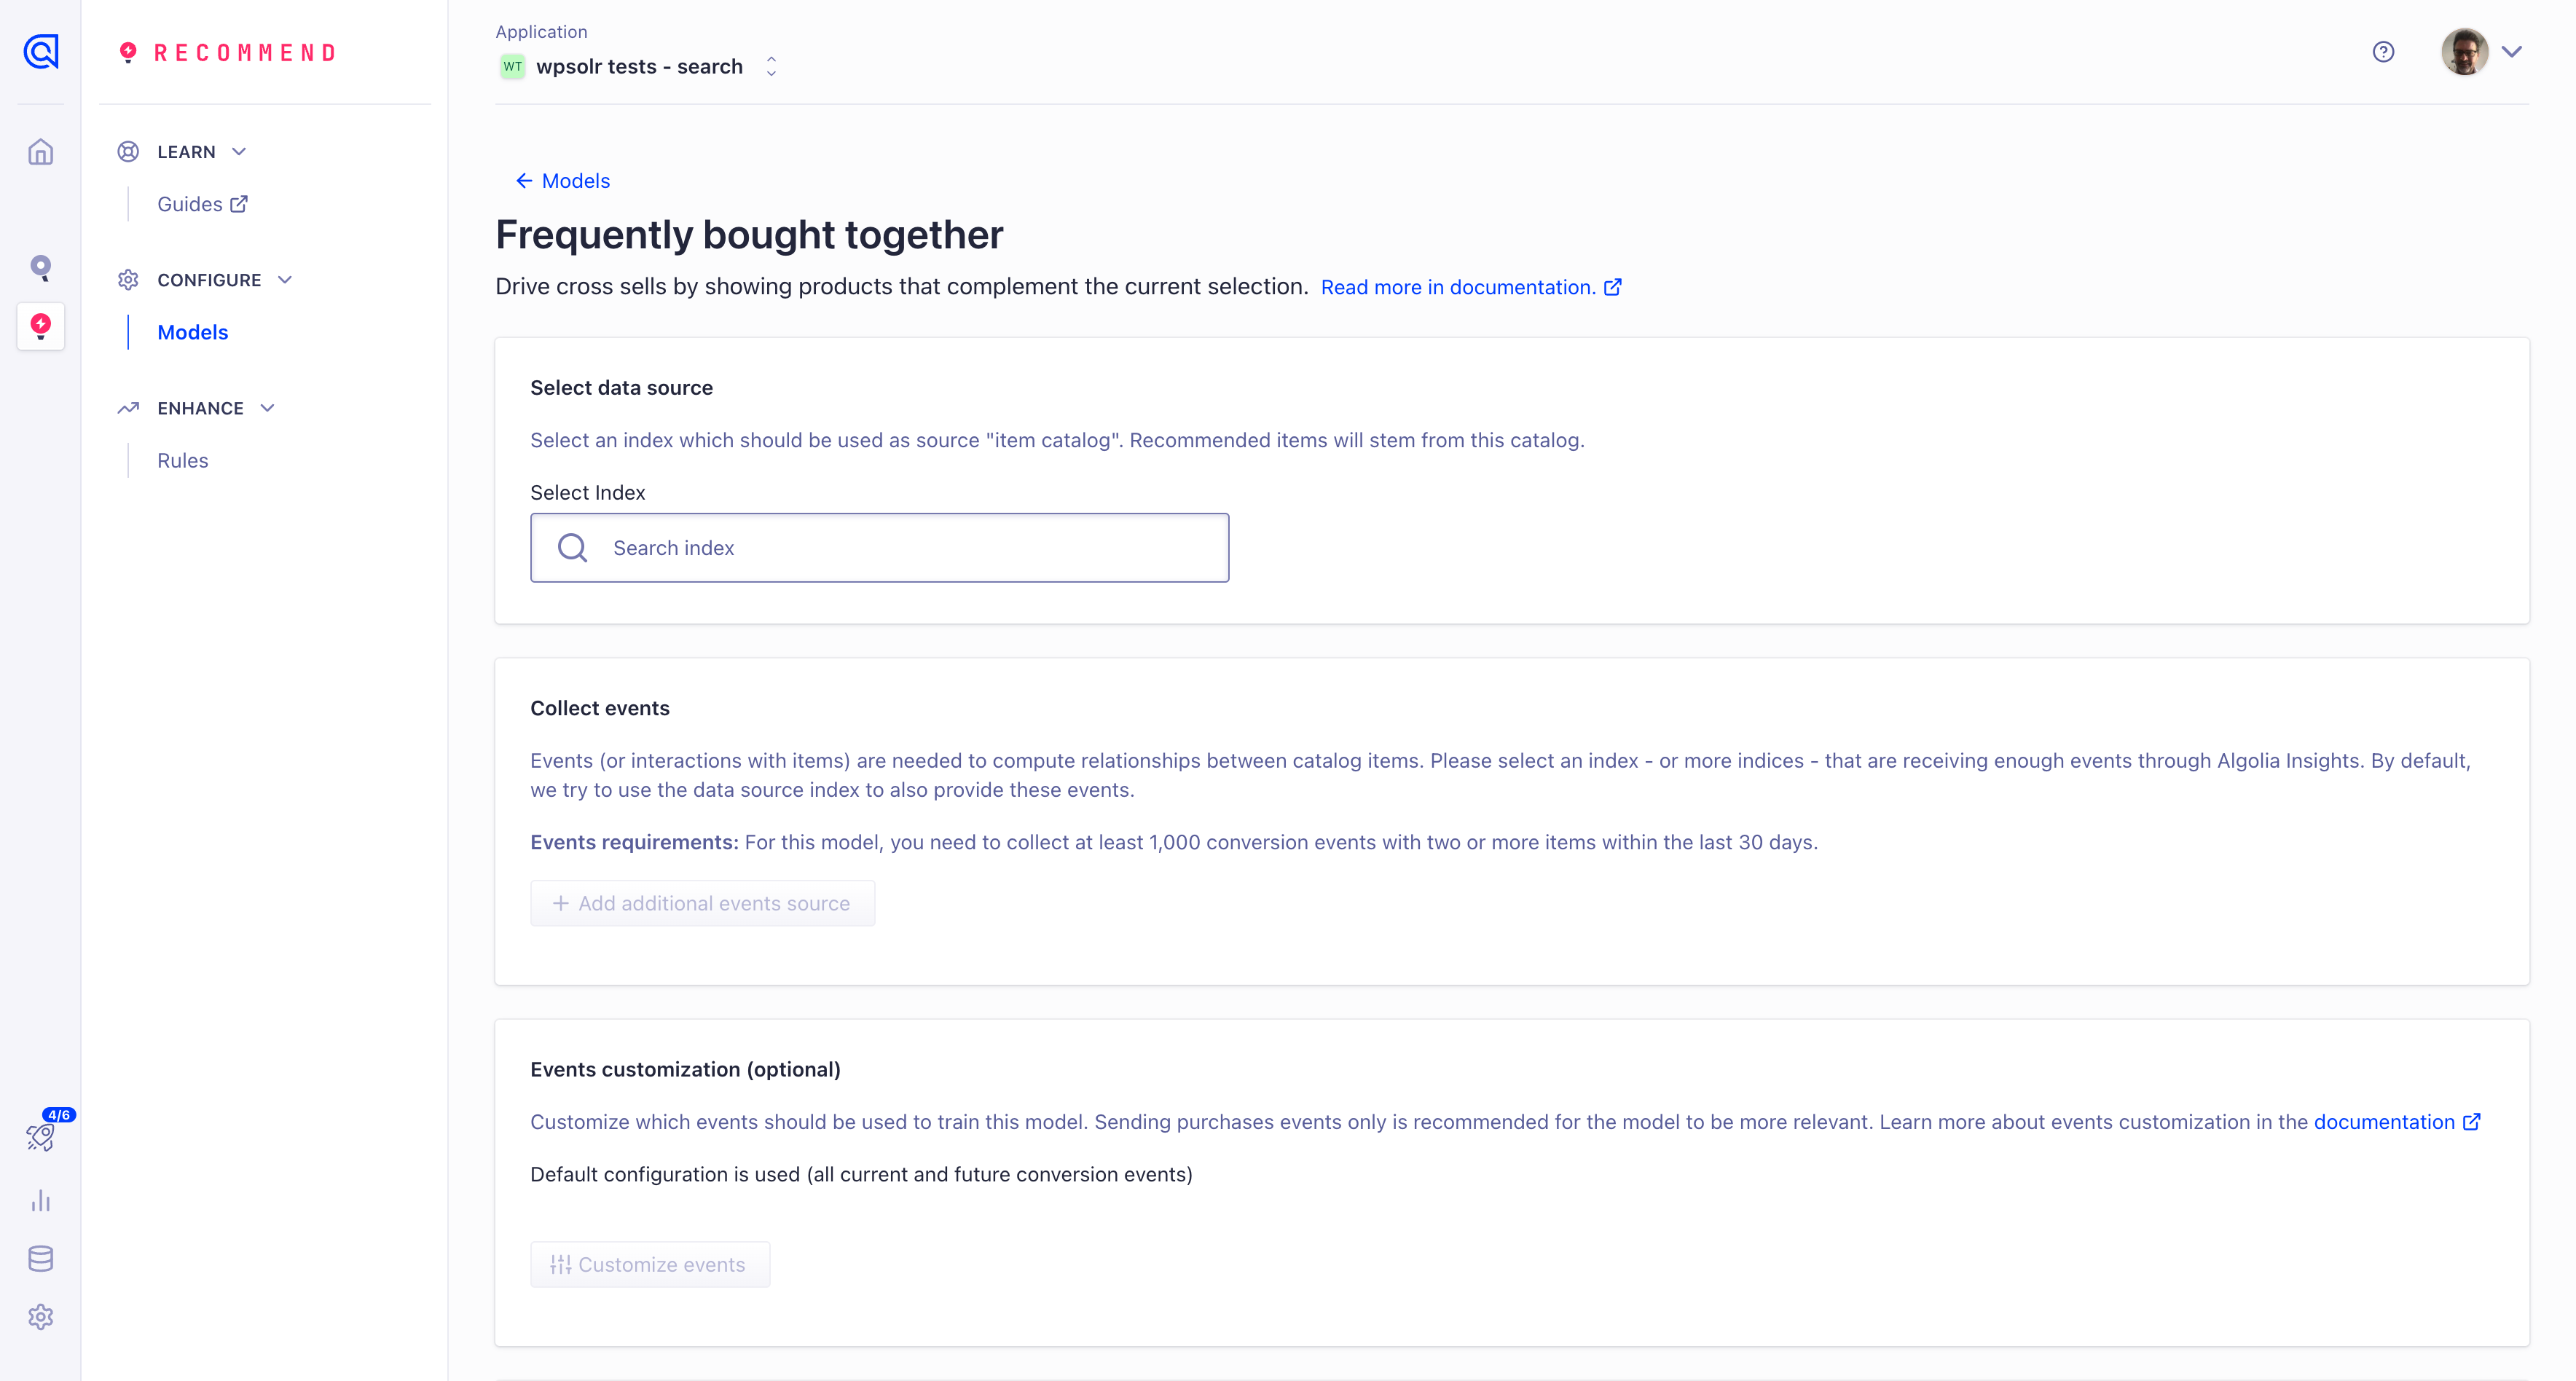 Image algolia-model-frequently-bought-together.png of Algolia recommendations guide